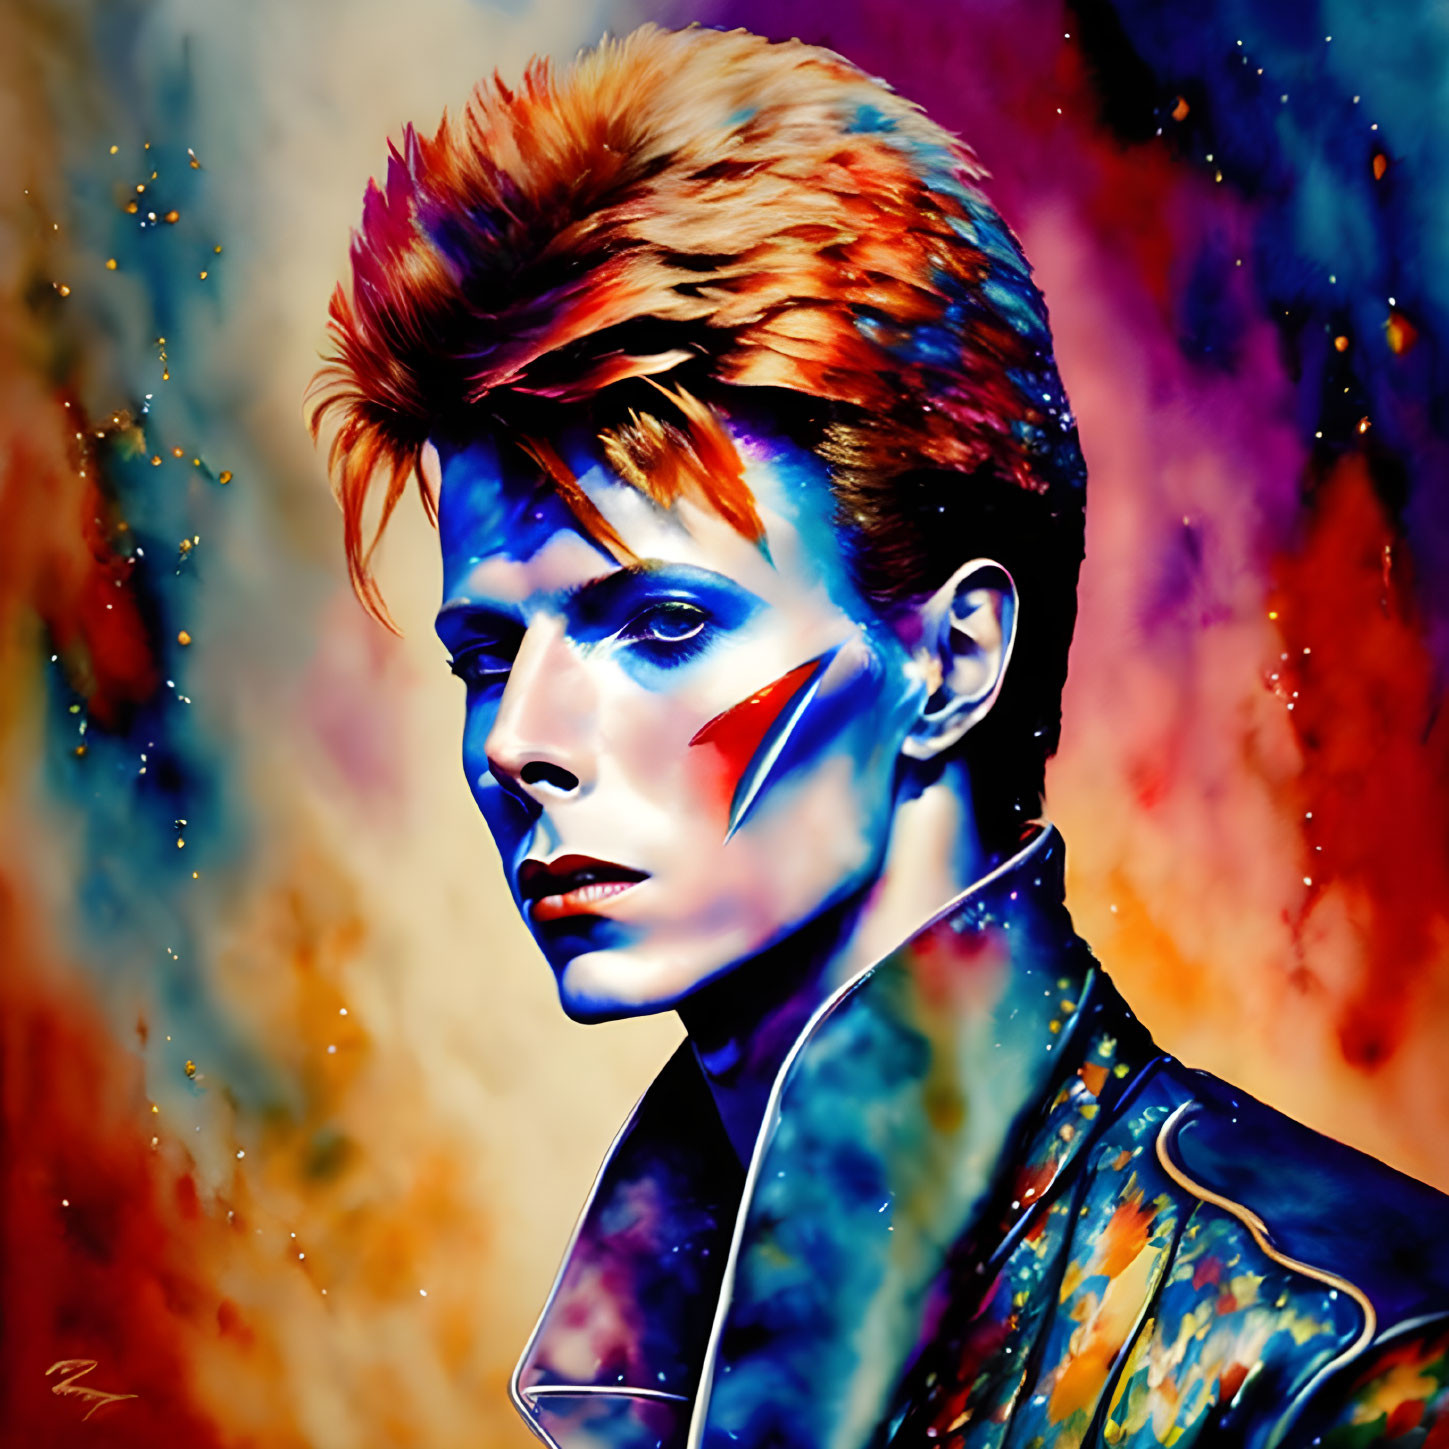 Vibrant digital artwork of stylized male figure with red and blue lightning bolt on face